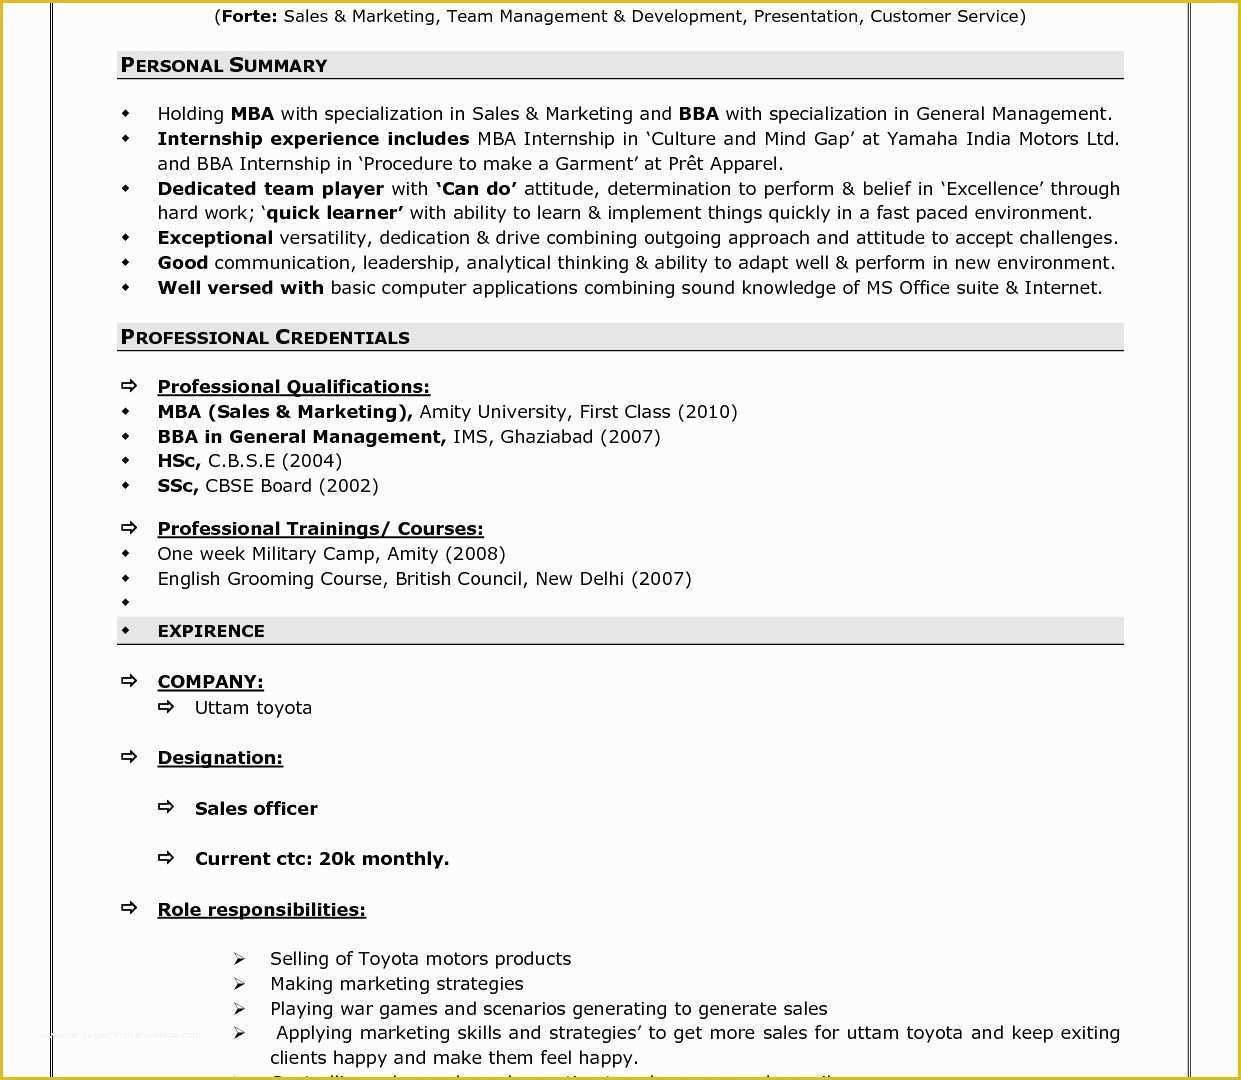 Video Editing Templates Free Download Of Resume and Template Resume Samples for Mba Freshers Free